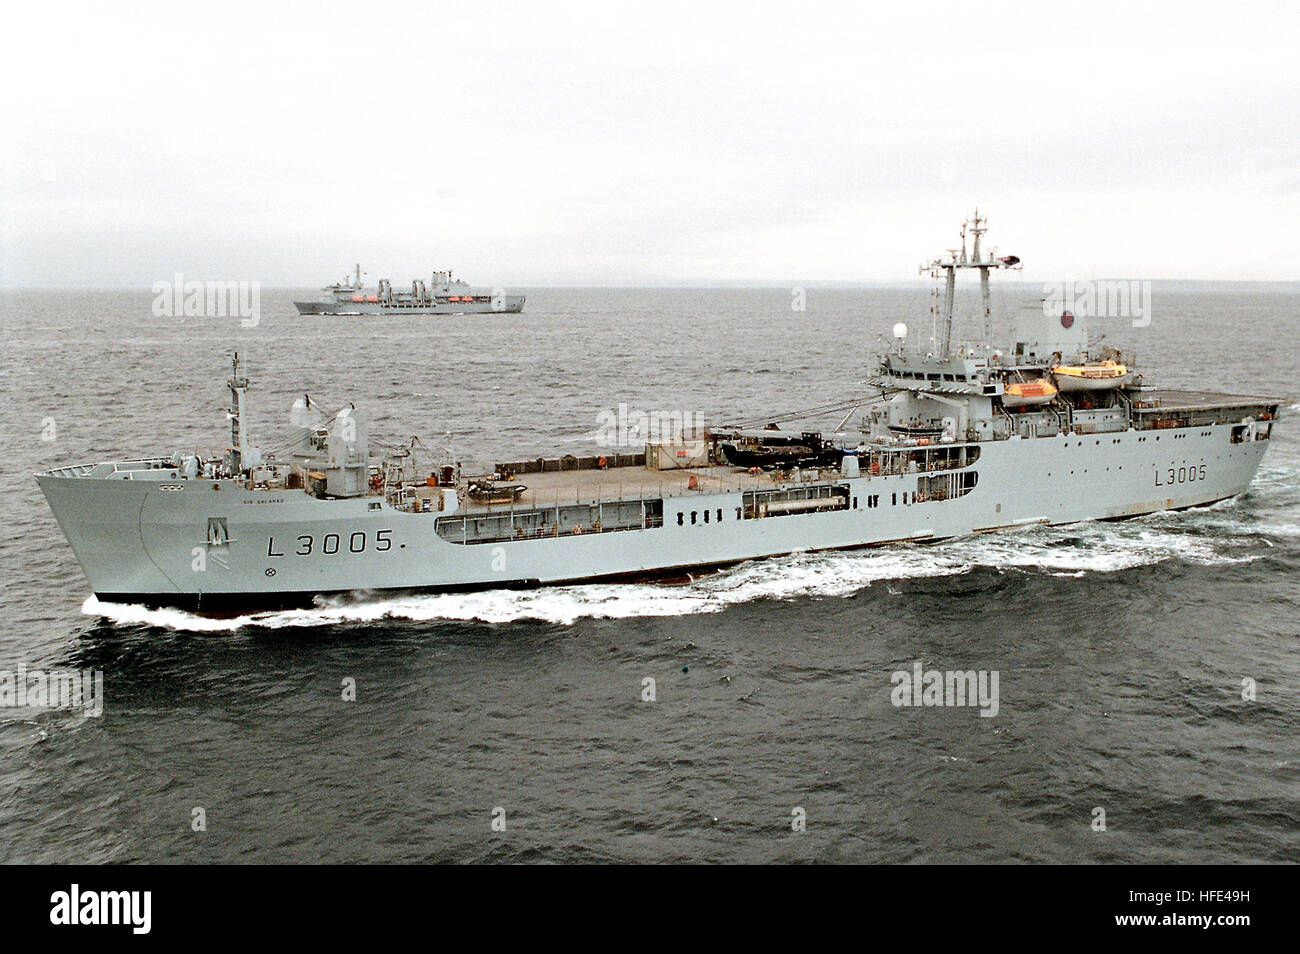 030326-N-0000C-001 Arabian Gulf (Mar. 26, 2003) -- The Royal Fleet Auxiliary, Landing Ship Logistic RFA Sir Galahad (L 3005) underway in the Arabian Gulf.  Sir Galahad, with a capability of carrying approximately 400 troops, with a beaching capacity of 3,440 tons, is expected to be the first ship to deliver coalition humanitarian supplies in support of Operation Iraqi Freedom.  It is currently loaded with 232,300 Kg. of supplies for the people of Iraq.  Operation Iraqi Freedom is the multi-national coalition effort to liberate the Iraqi people, eliminate IraqÕs weapons of mass destruction, and Stock Photo